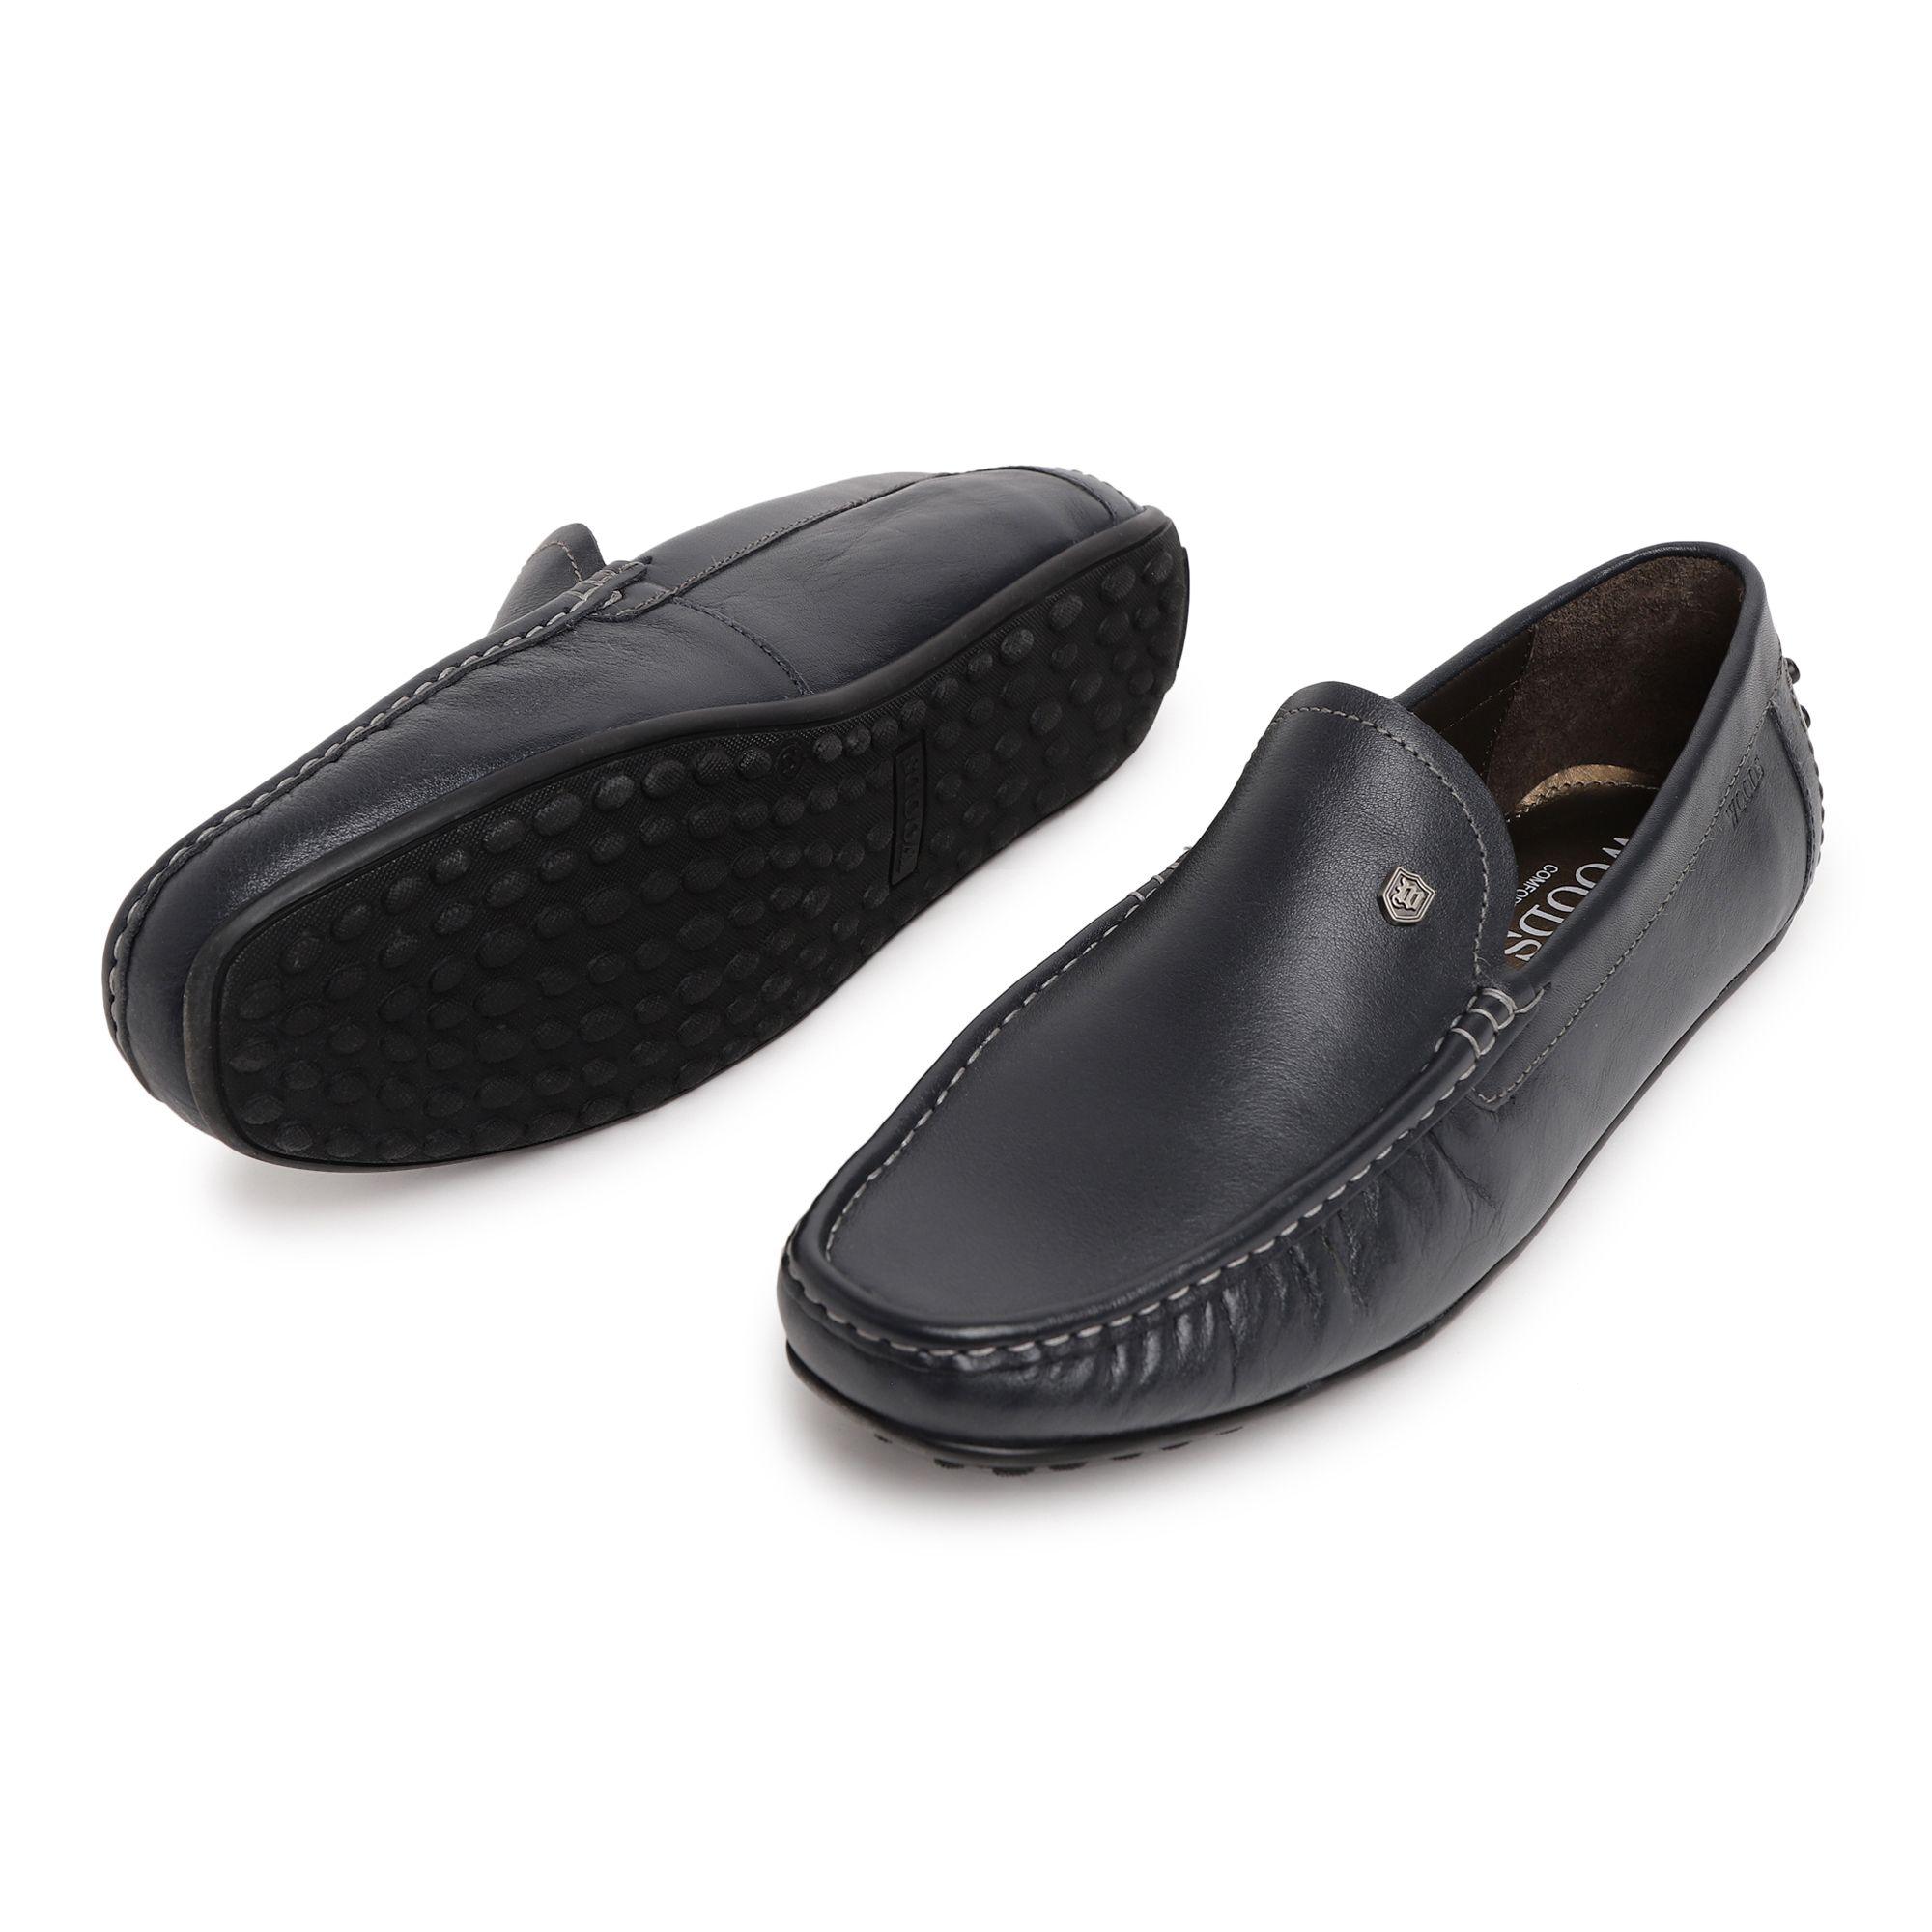 Nblue Penny Loafers for Men